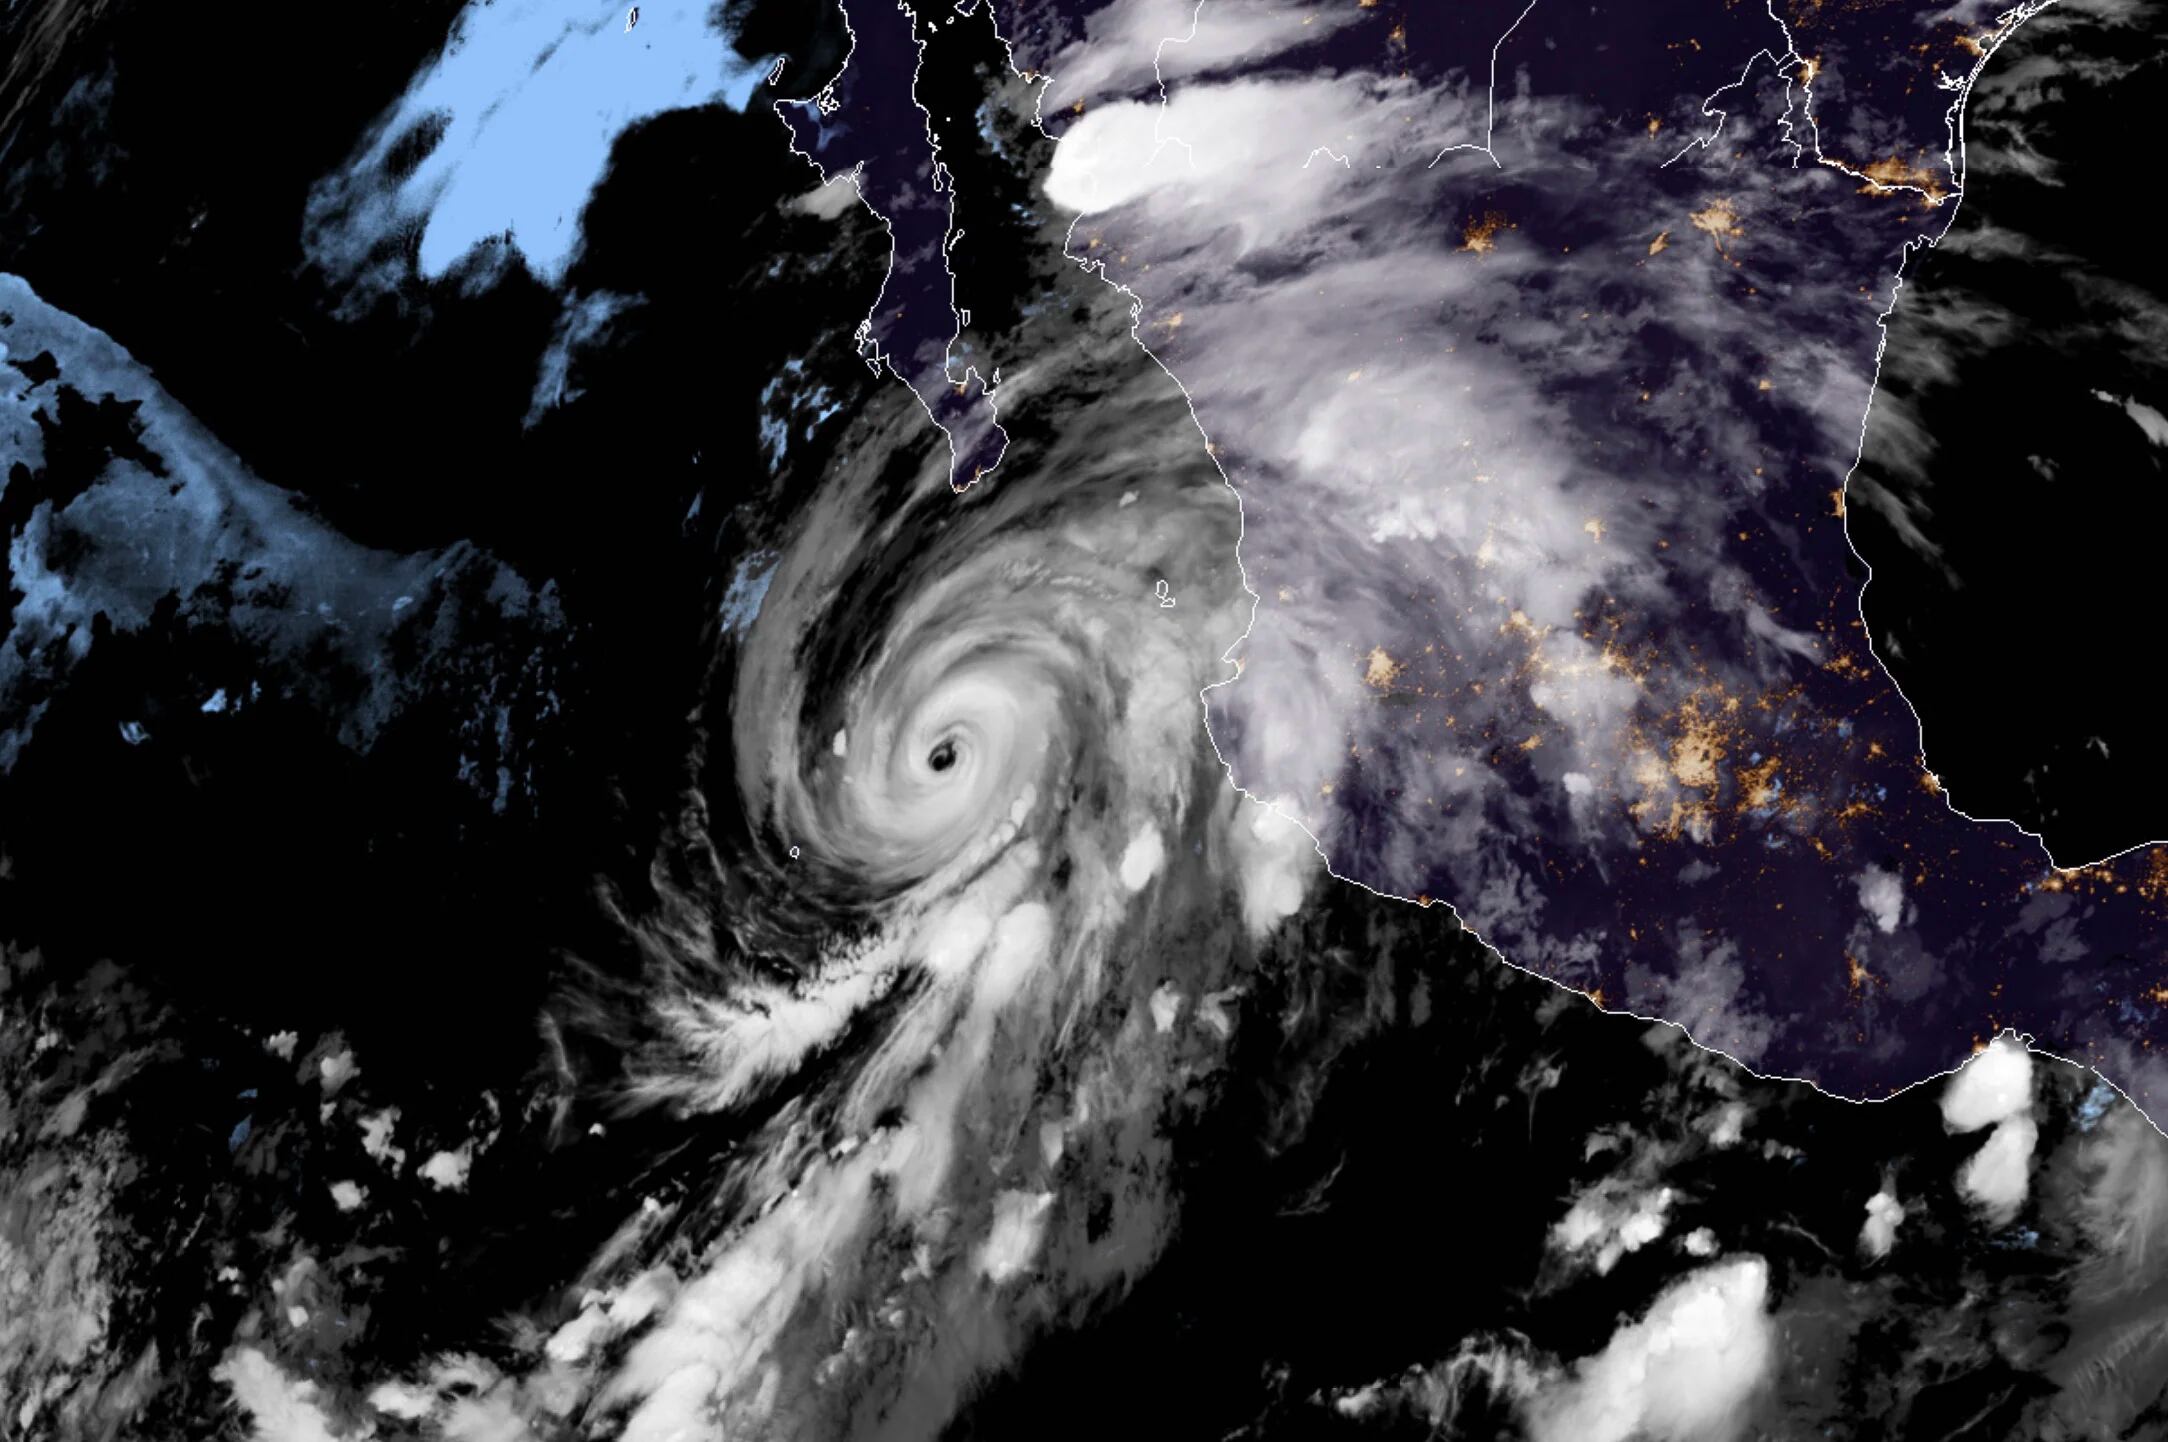 This RAMMB/NOAA satellite image obtained on August 18, 2020, shows Hurricane Genevieve moving towards Baja California on August 19, 2020 at 05:10:21 UTC. - Authorities in Mexico's Baja California closed ports and beaches on August 18 as Hurricane Genevieve barreled toward the peninsula packing winds of nearly 195 kilometers (120 miles) per hour. (Photo by - / RAMMB/NOAA/NESDIS / AFP) / RESTRICTED TO EDITORIAL USE - MANDATORY CREDIT "AFP PHOTO / RAMMB/NOAA" - NO MARKETING - NO ADVERTISING CAMPAIGNS - DISTRIBUTED AS A SERVICE TO CLIENTS